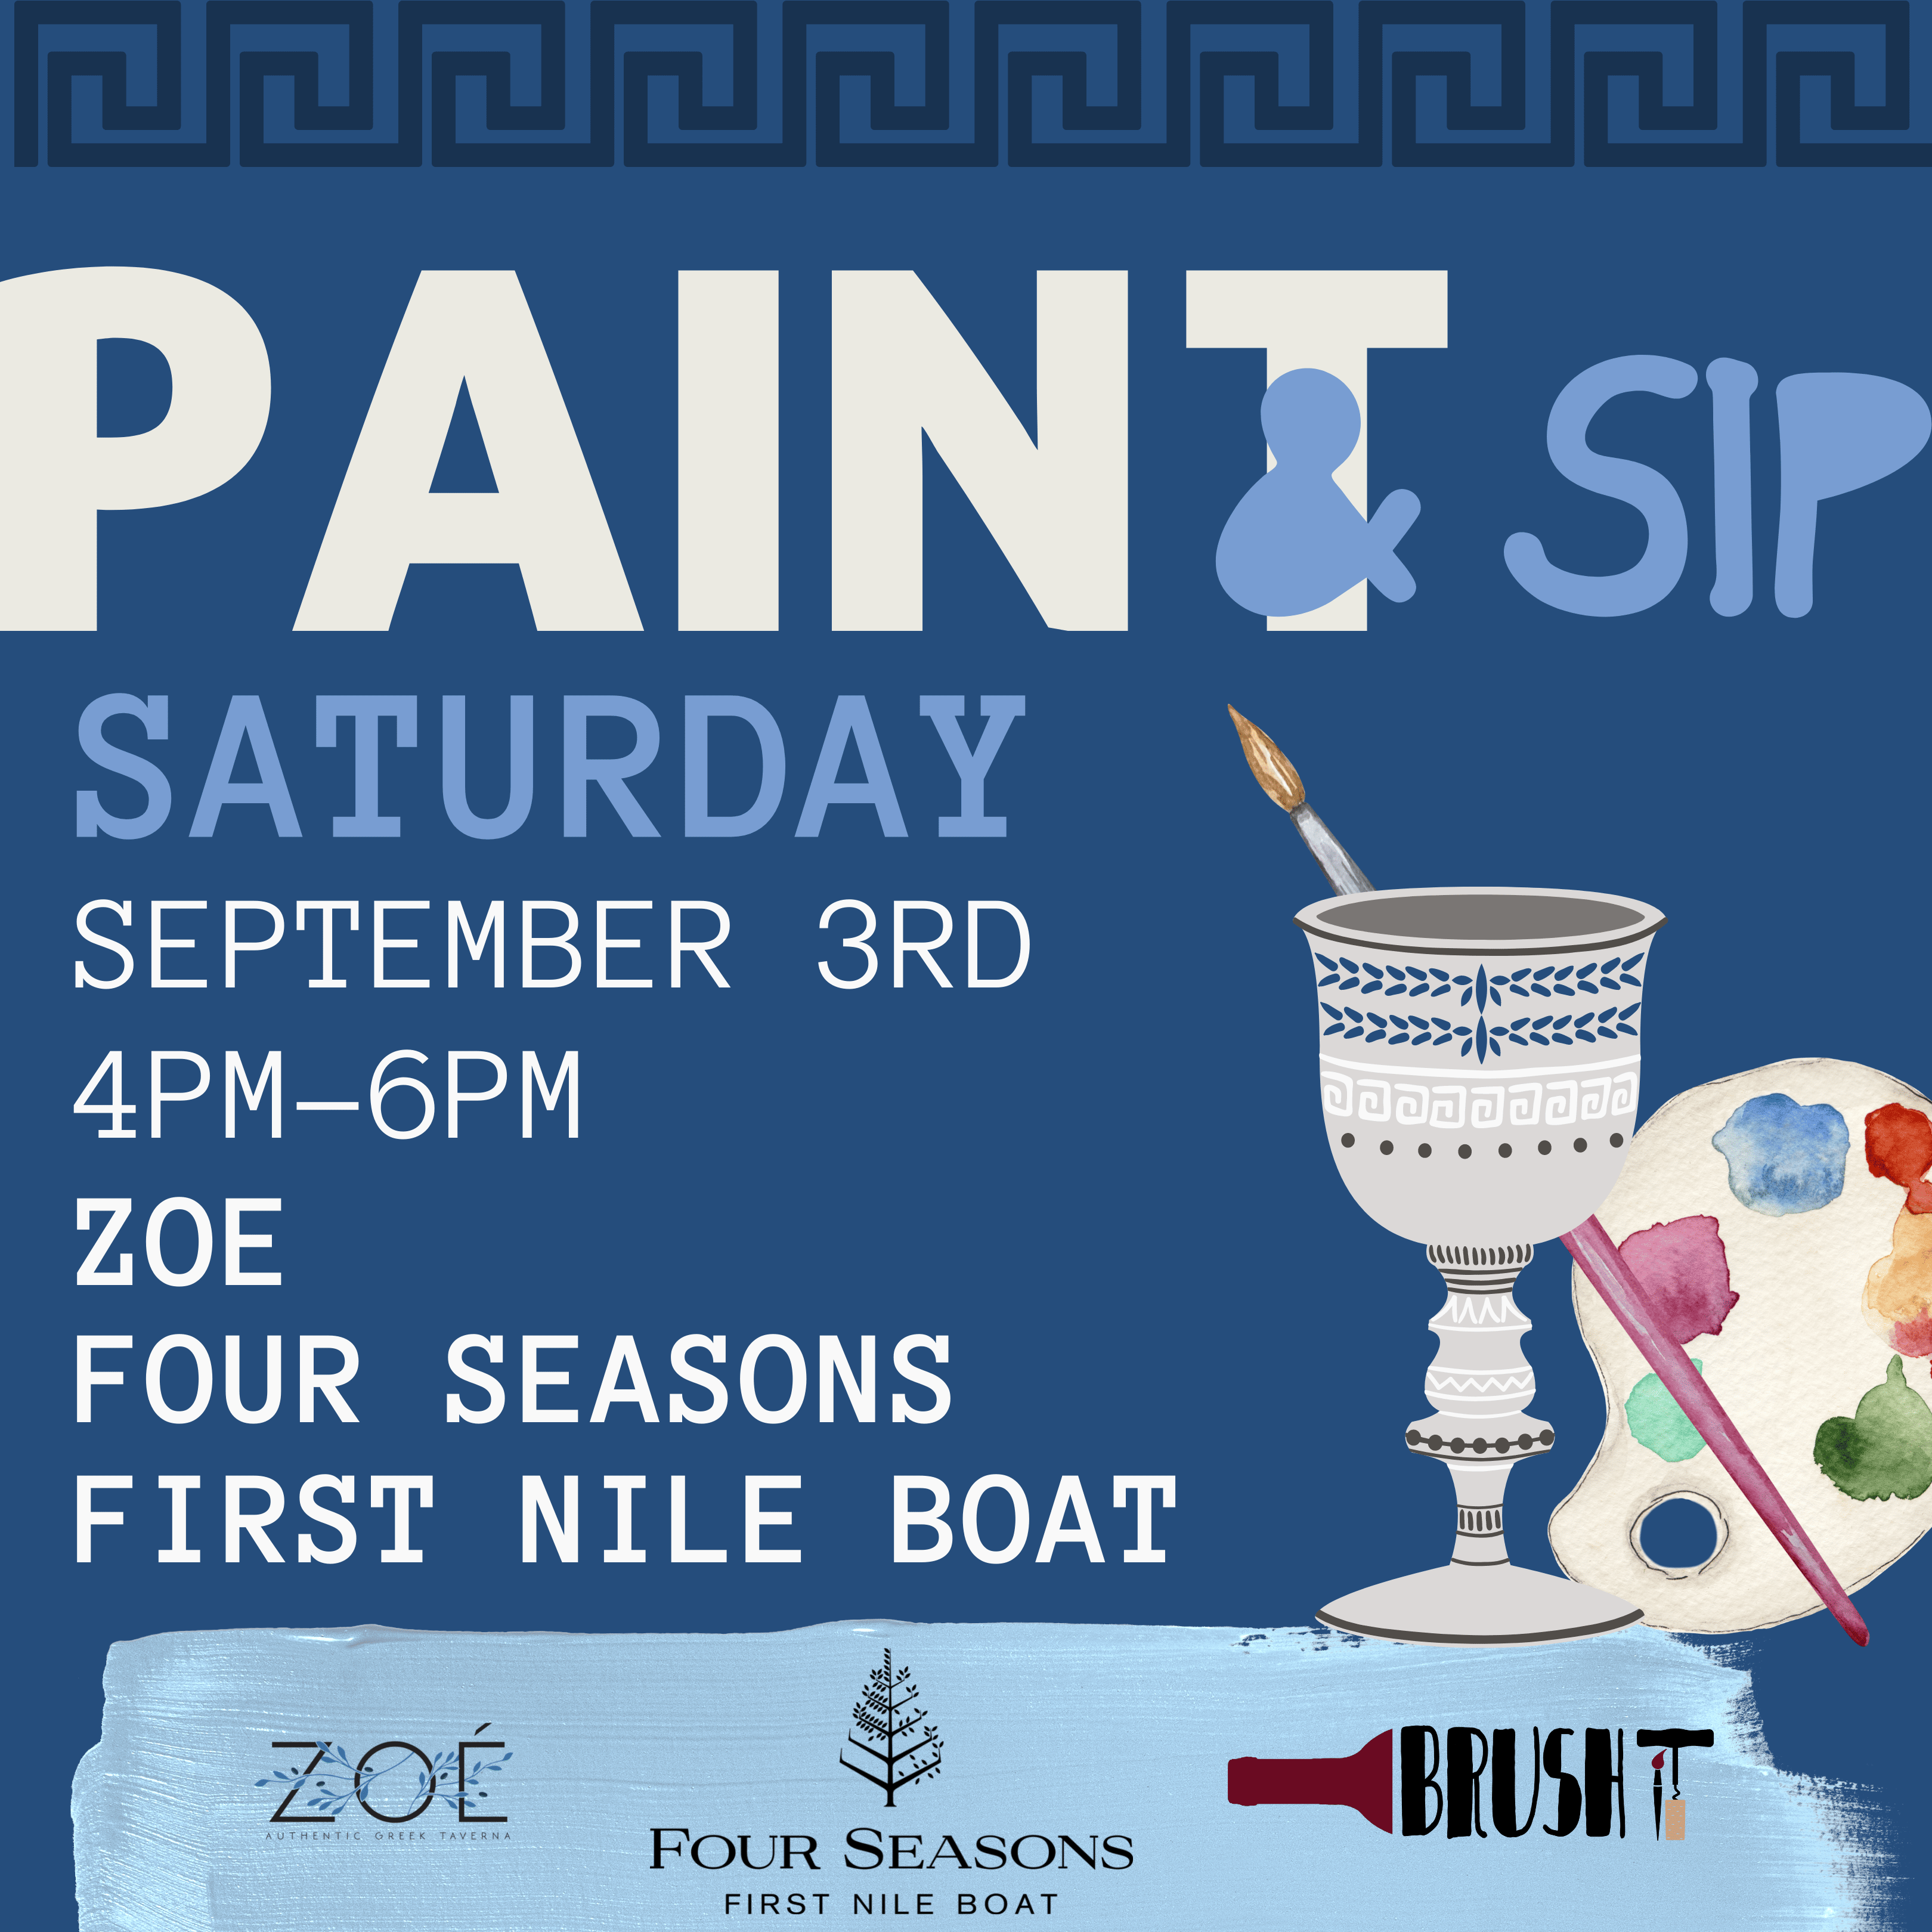 SATURDAY, September 3rd - 4:00 pm - 6:00 pm - BY THE NILE - FIRST NILE BOAT - FOUR SEASONS